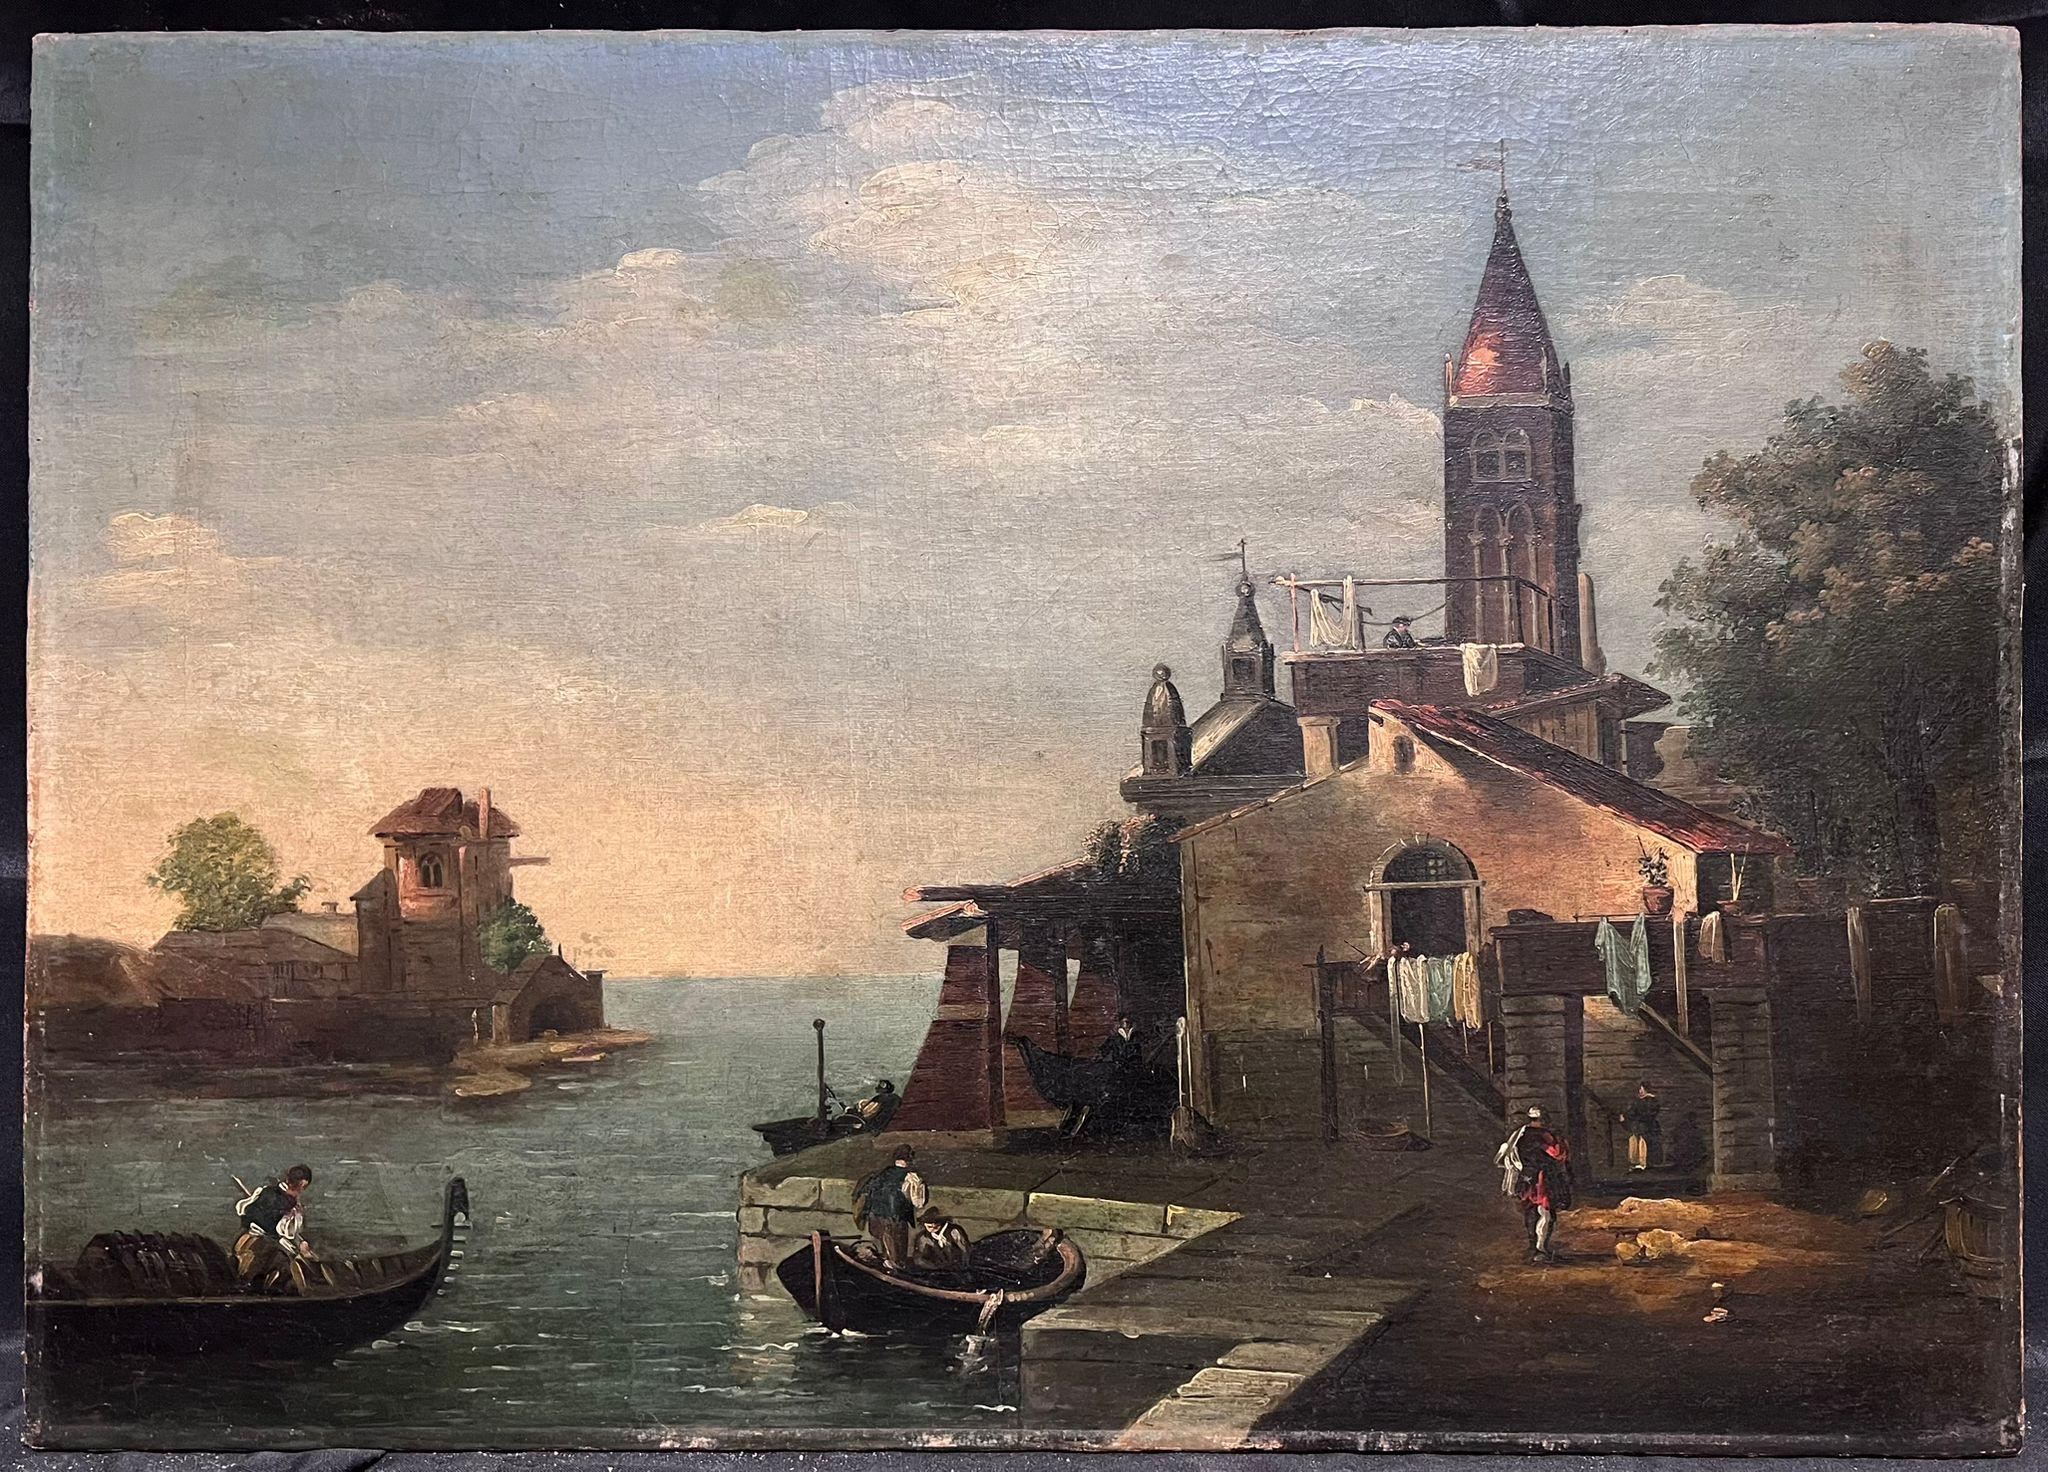 The Trading Port
Italian artist, circa 1720's period
circle of Michele Marieschi (Italian 1696-1744)
oil on canvas, unframed
canvas: 21 x 30 inches
provenance: private collection, UK
condition: overall very good and sound condition 